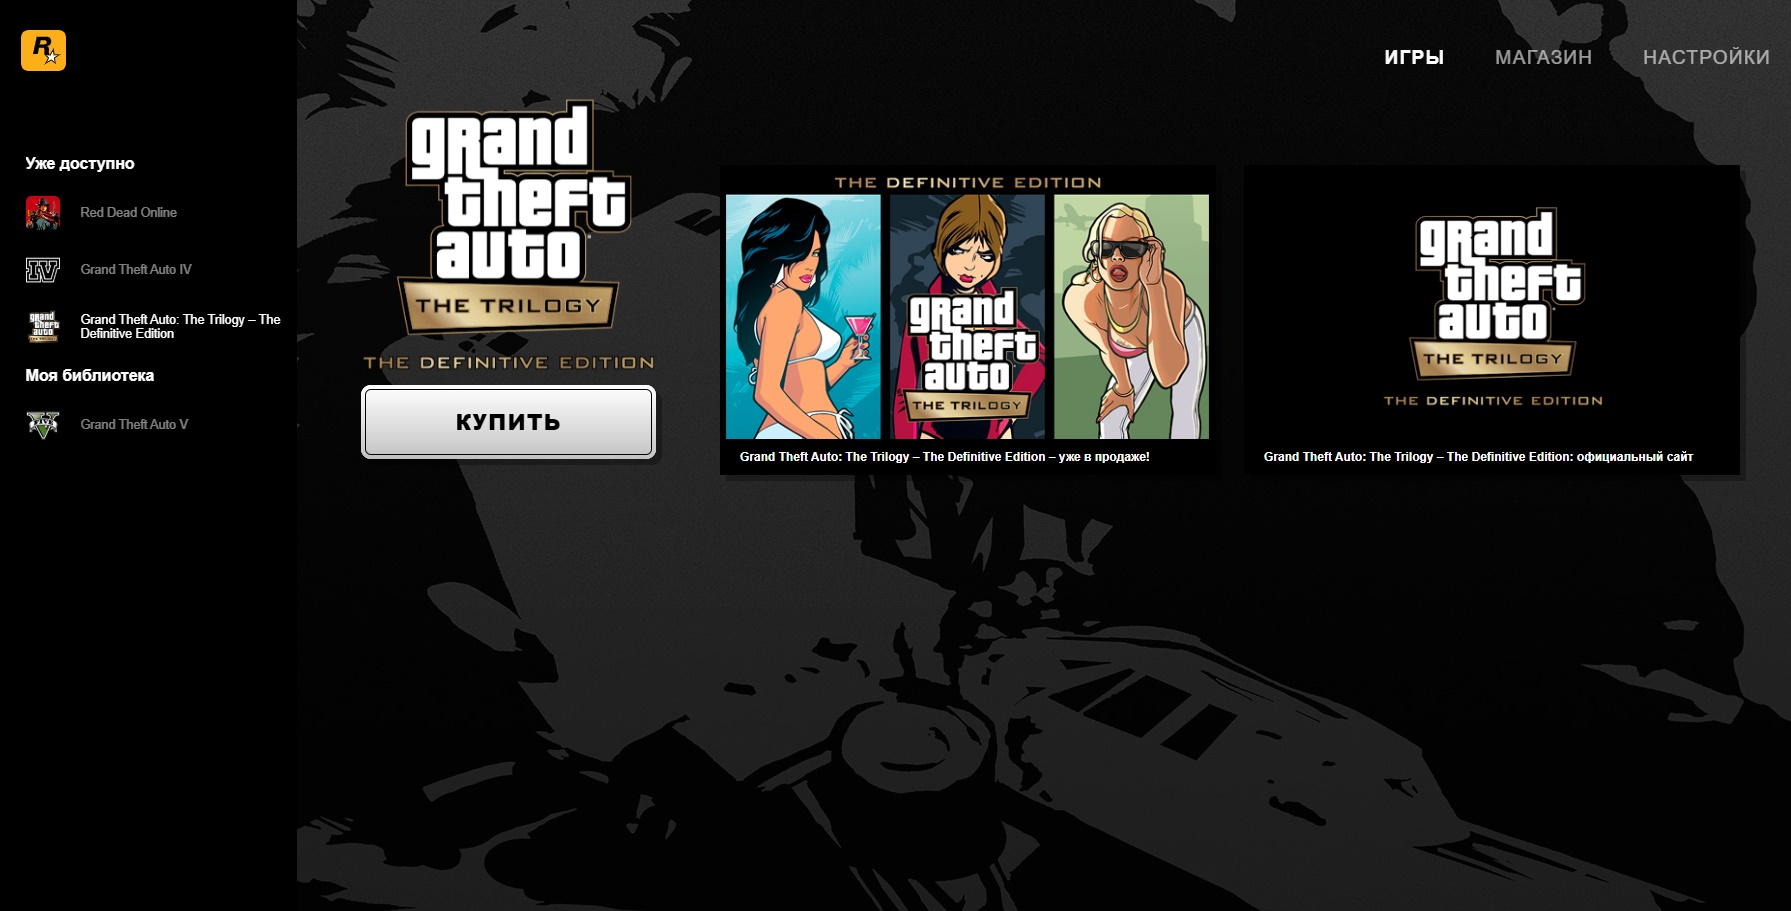 Error could not access game process shutdown rockstar games launcher and steam фото 42